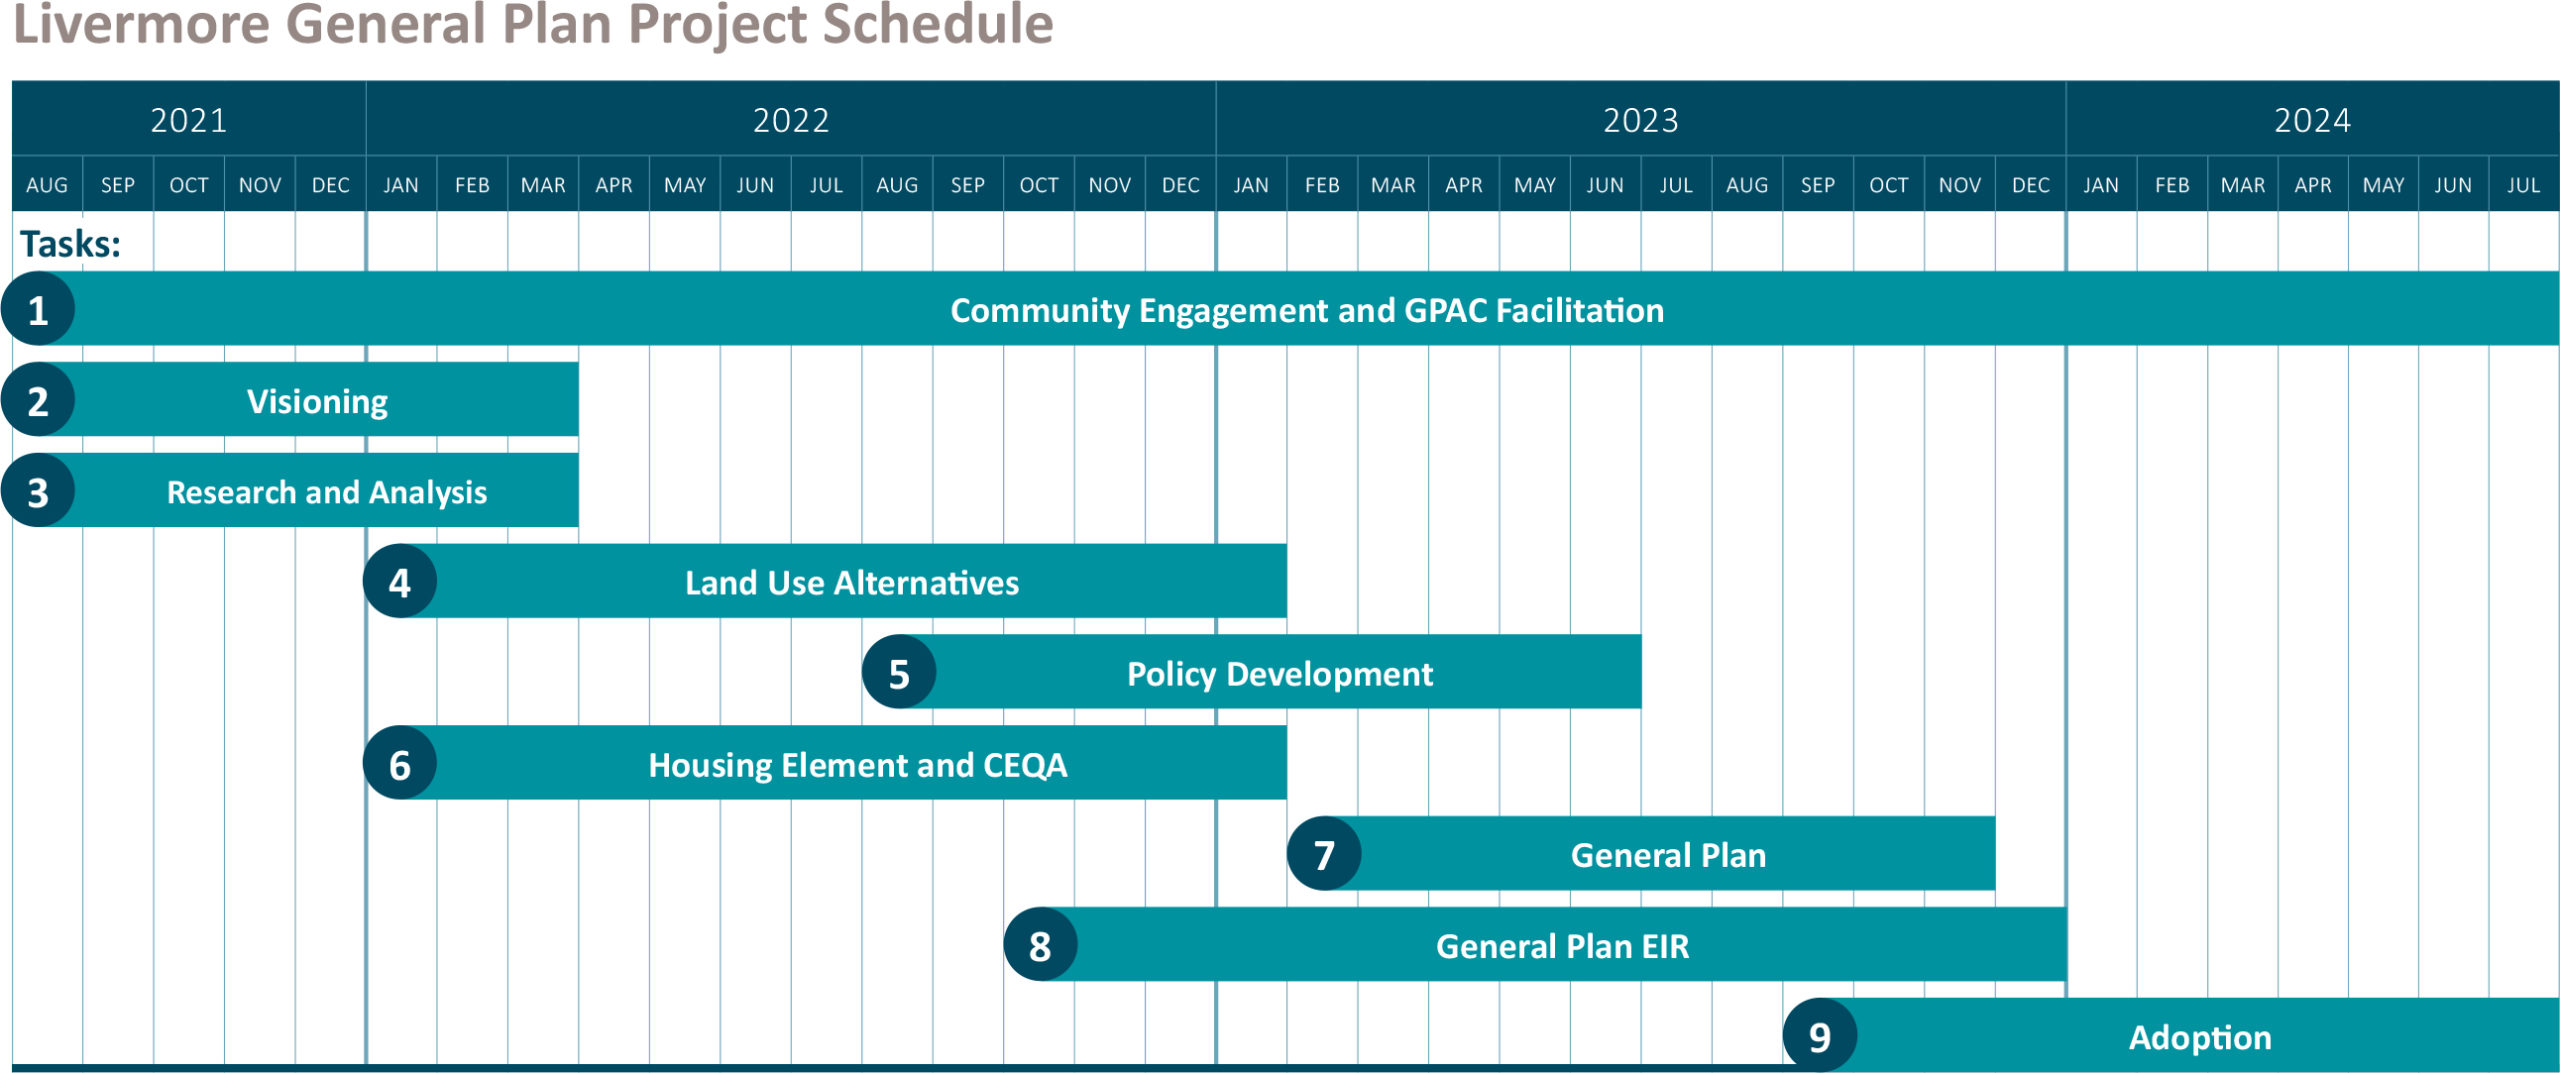 Livermore General Plan Project Schedule, Revised Feb 10, 2022